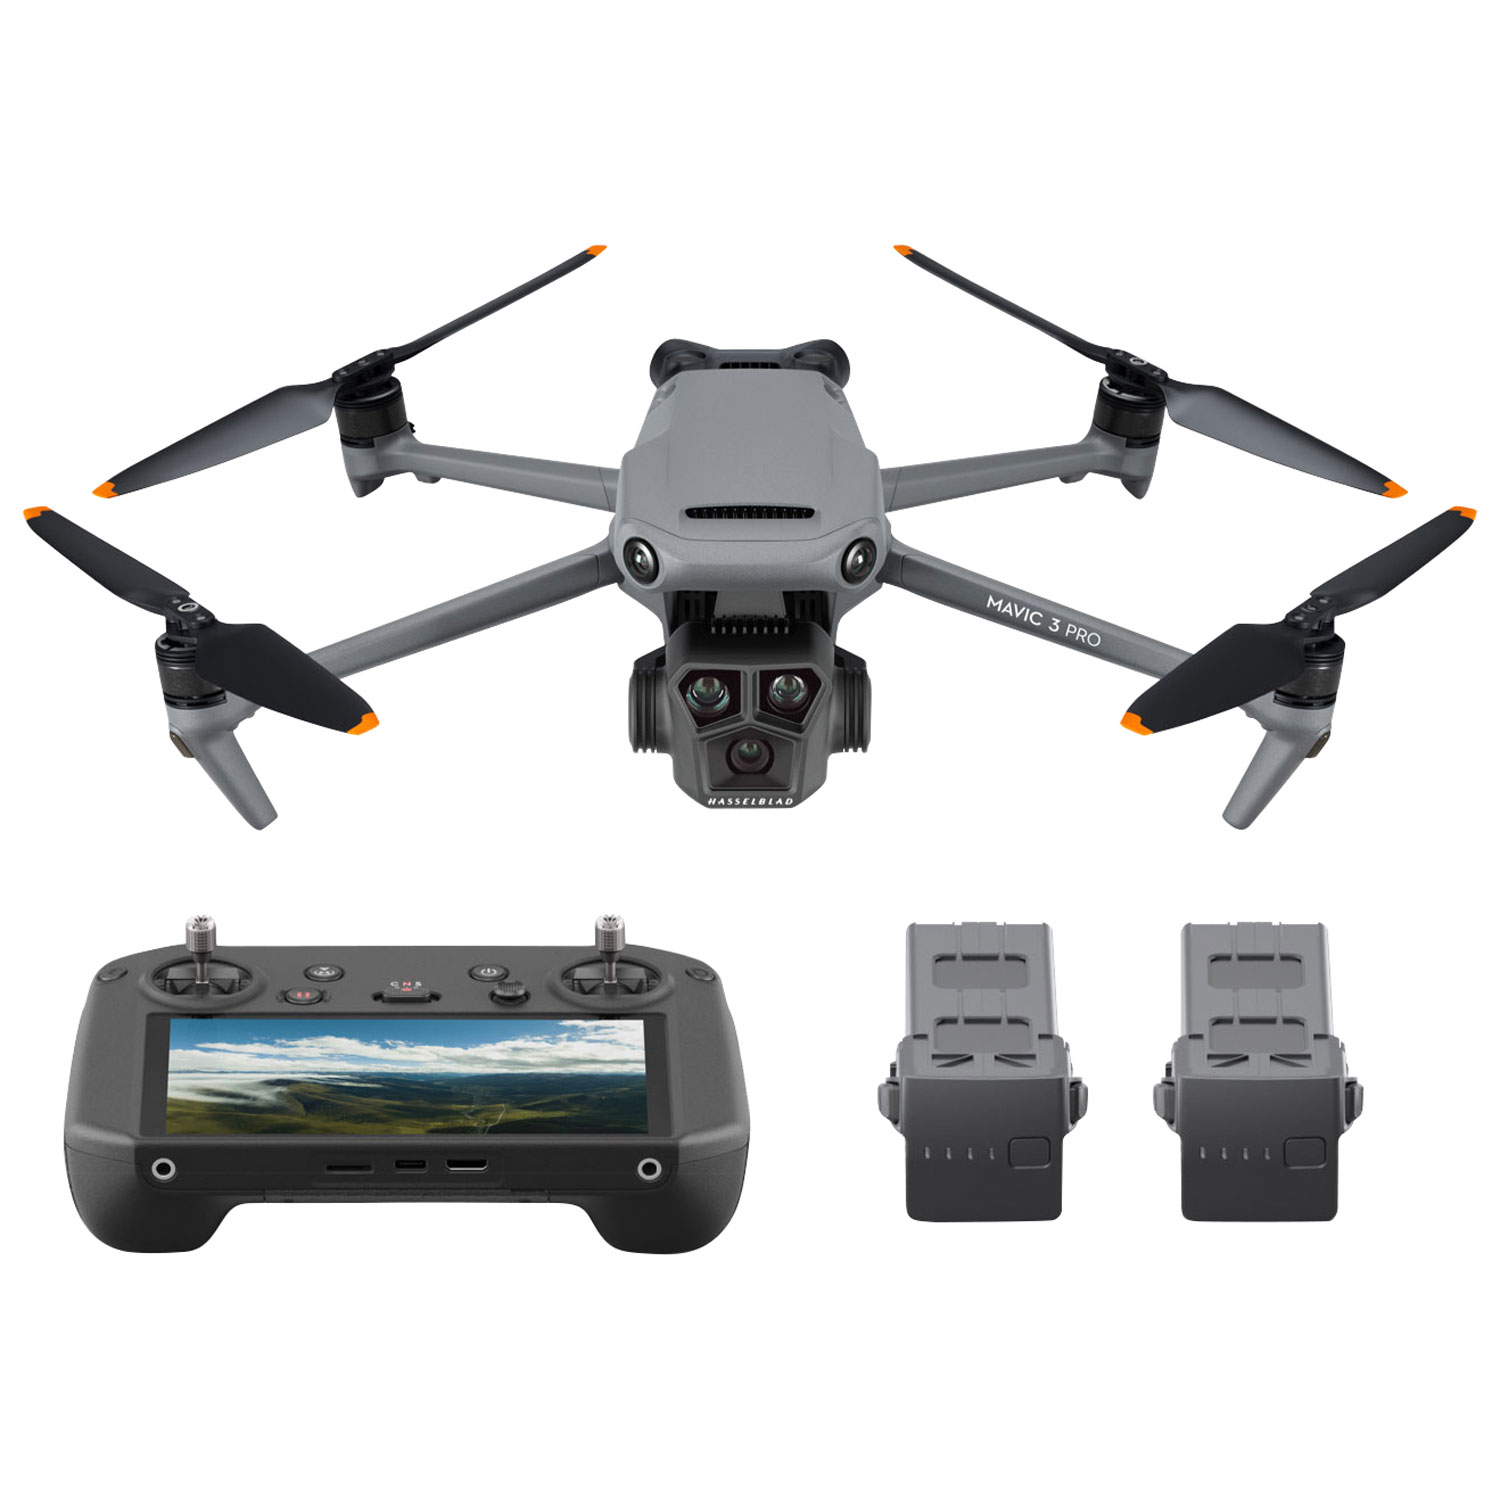 DJI Mavic 3 Pro Fly More Combo Drone and Remote Control with Built-in Screen (DJI RC Pro) - Grey